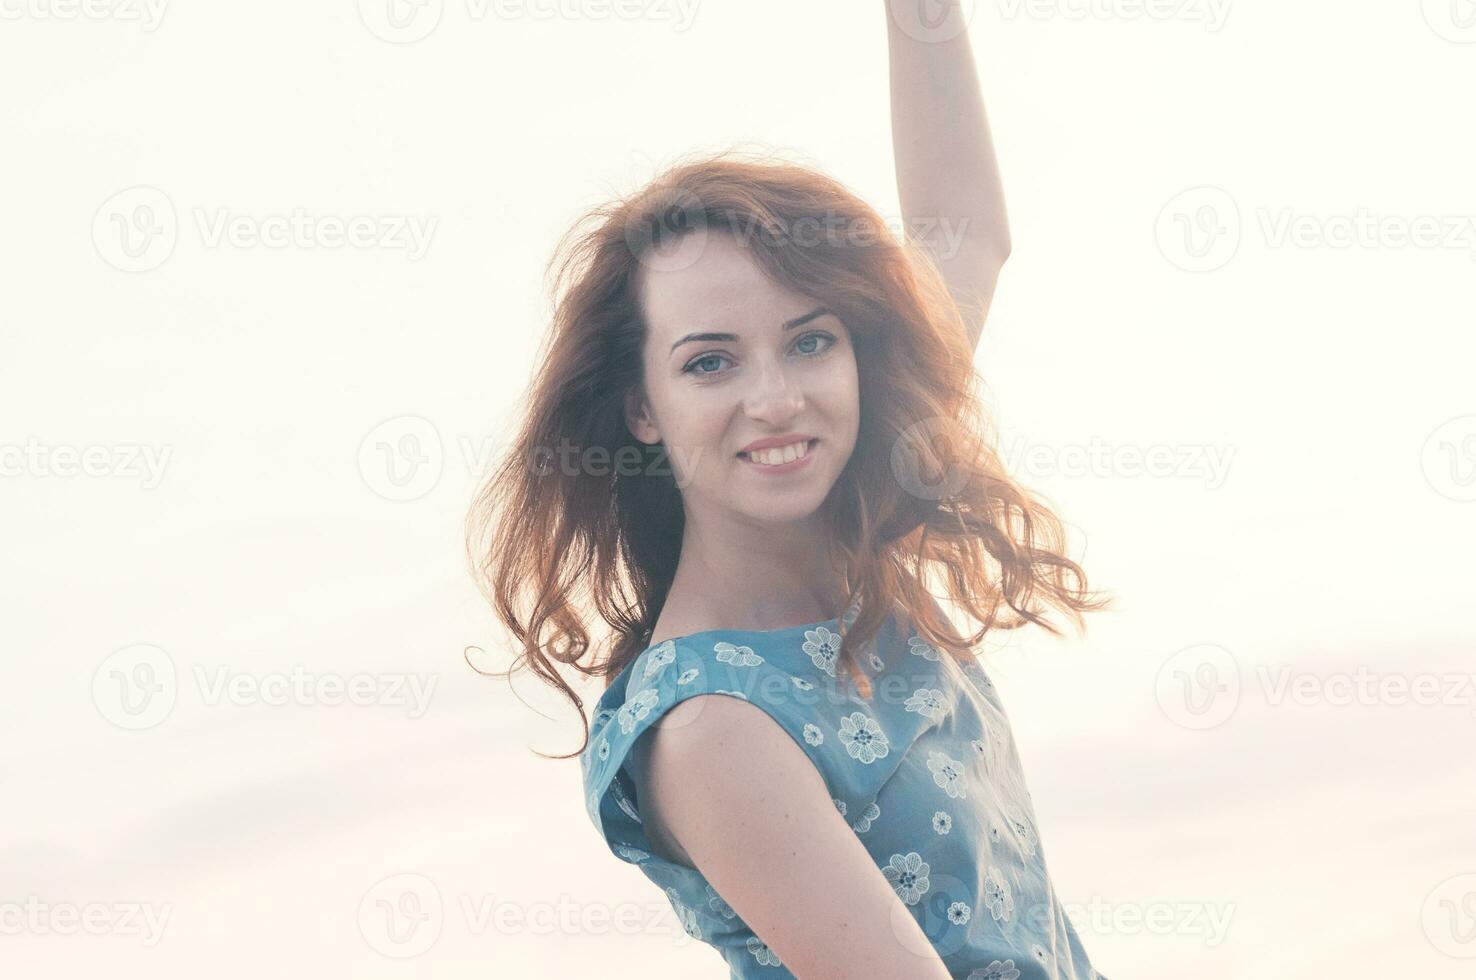 Pretty Girl Truly Smiling, Dancing, Outdoors Summertime photo